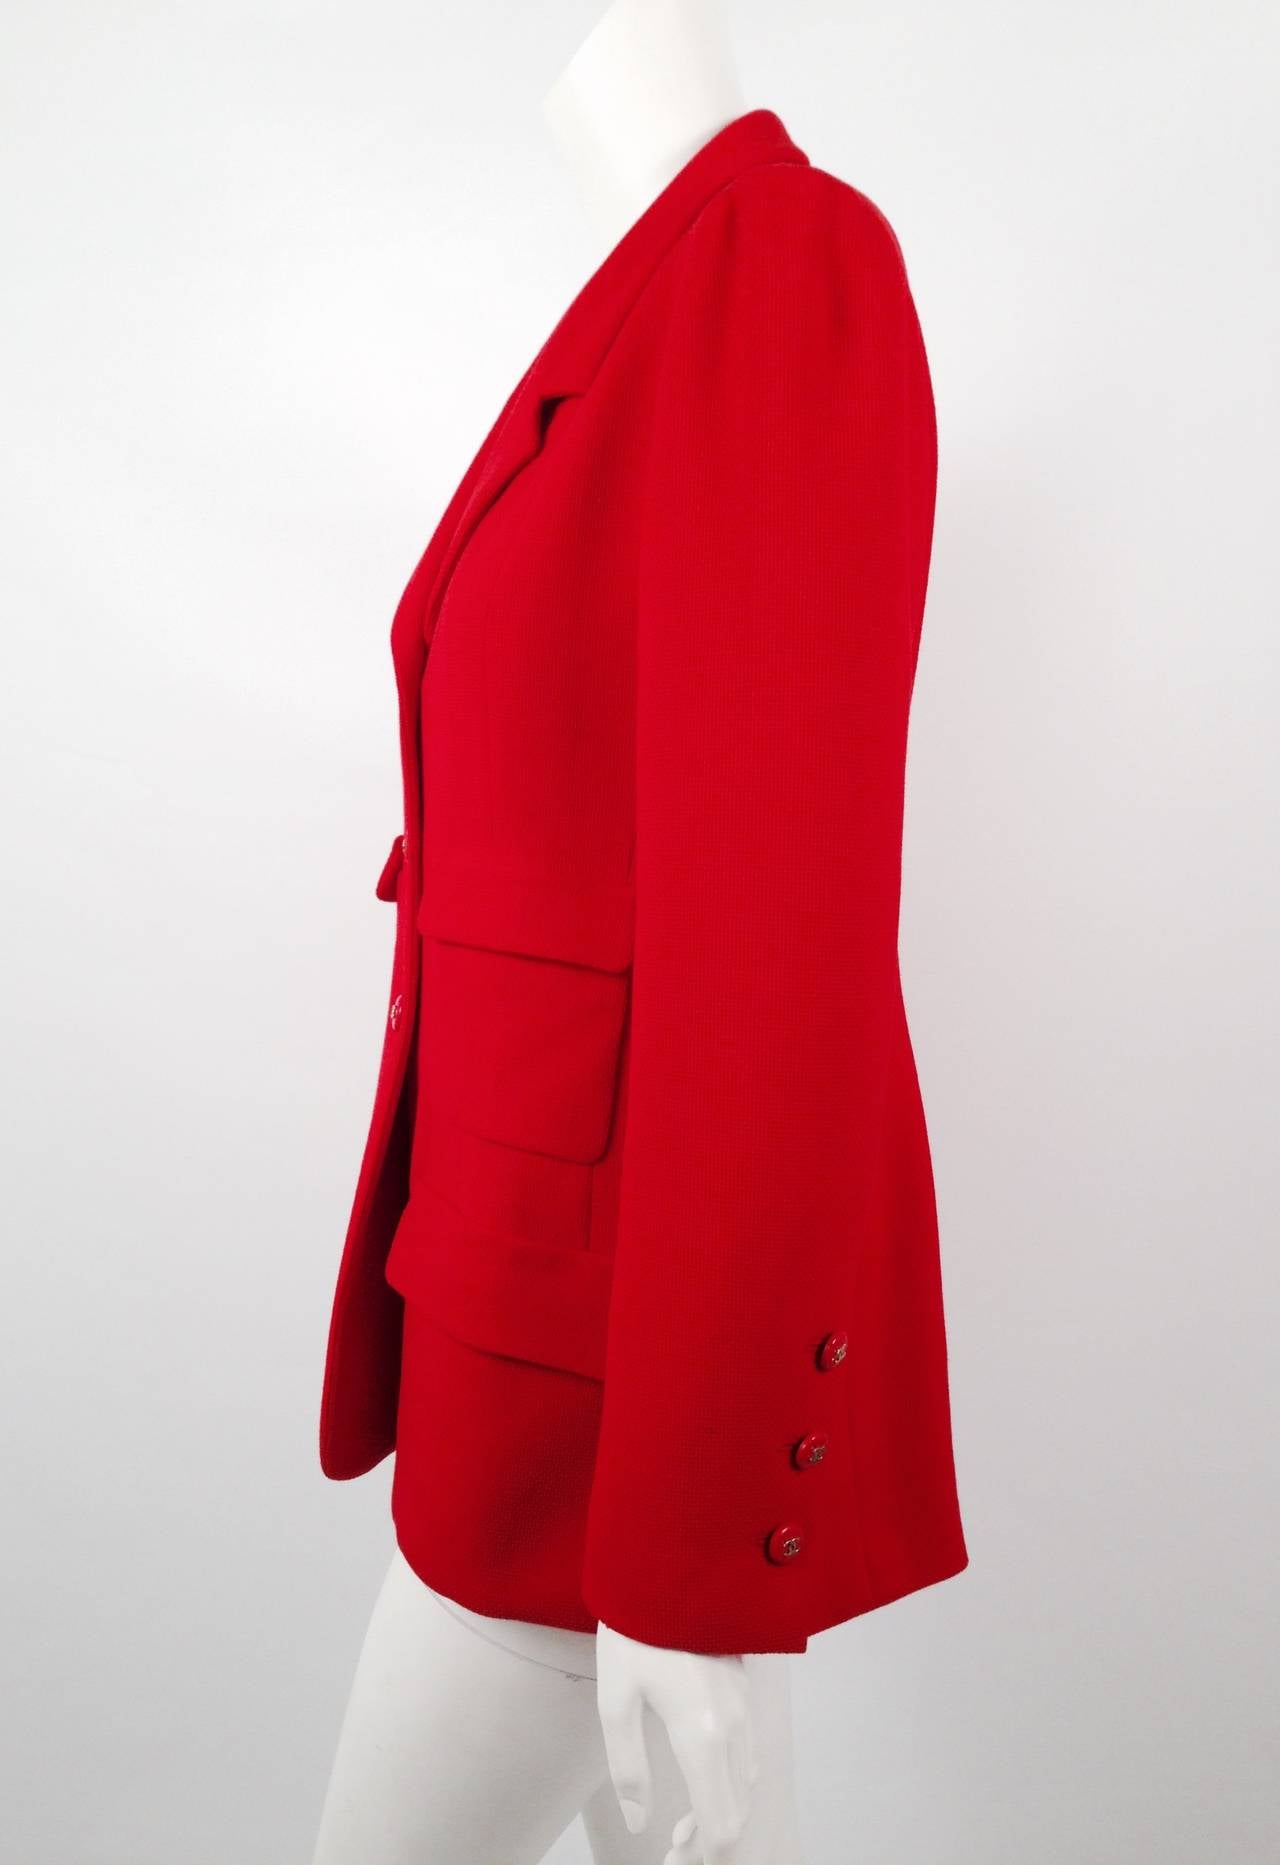 Women's Chanel Red Pique Fabric Jacket